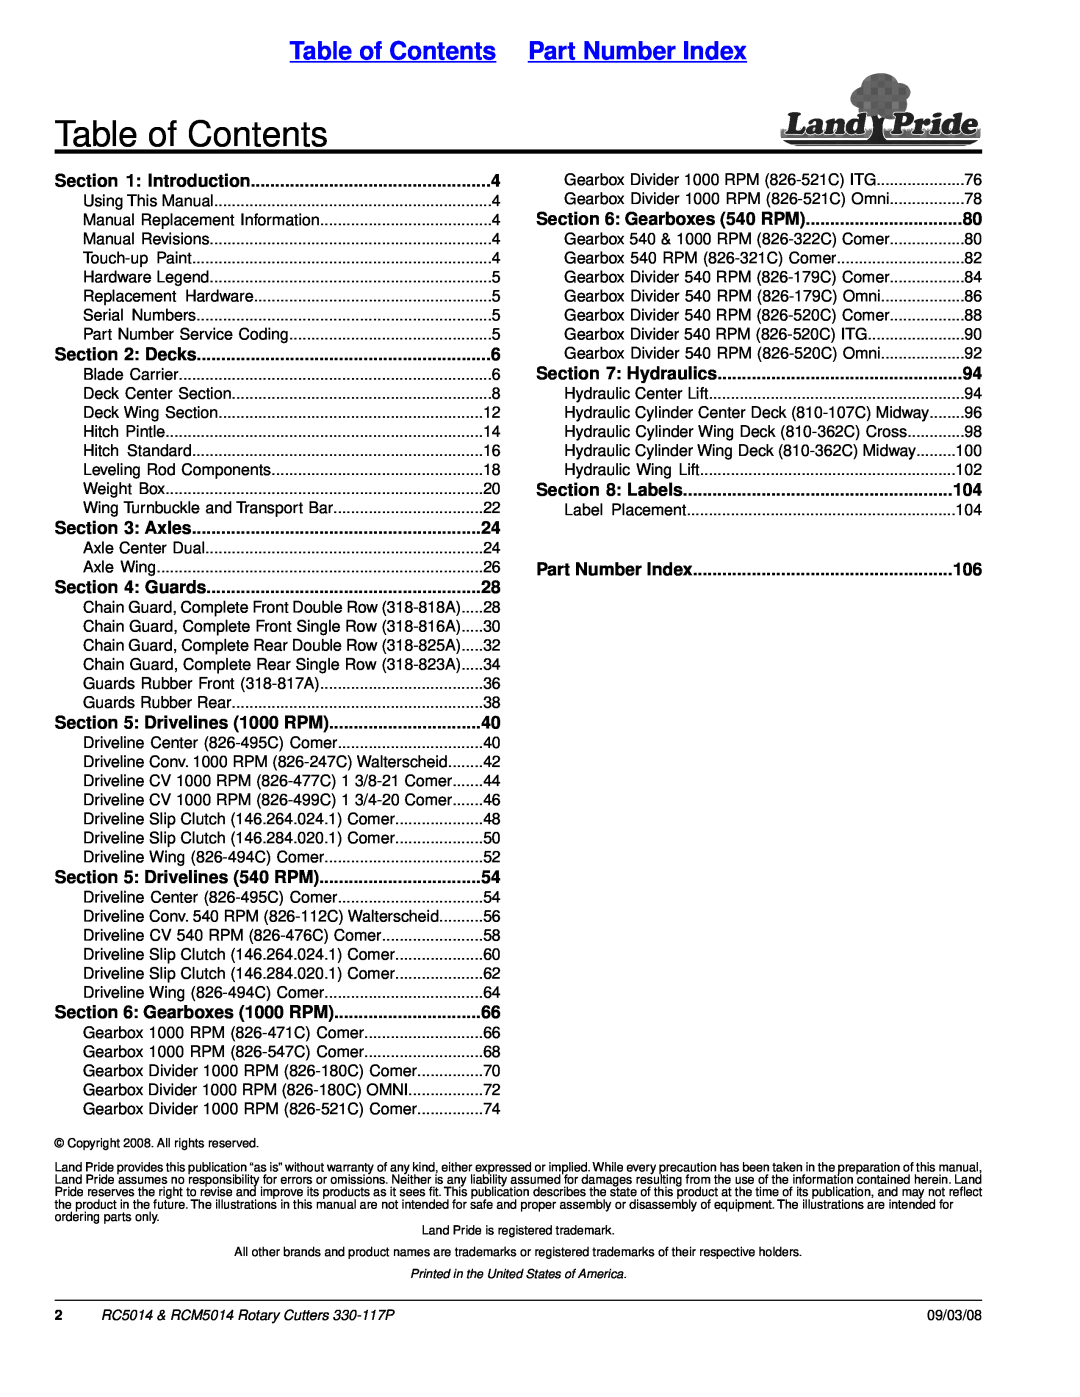 Land Pride RC5014, RCM5014 manual Table of Contents Part Number Index 